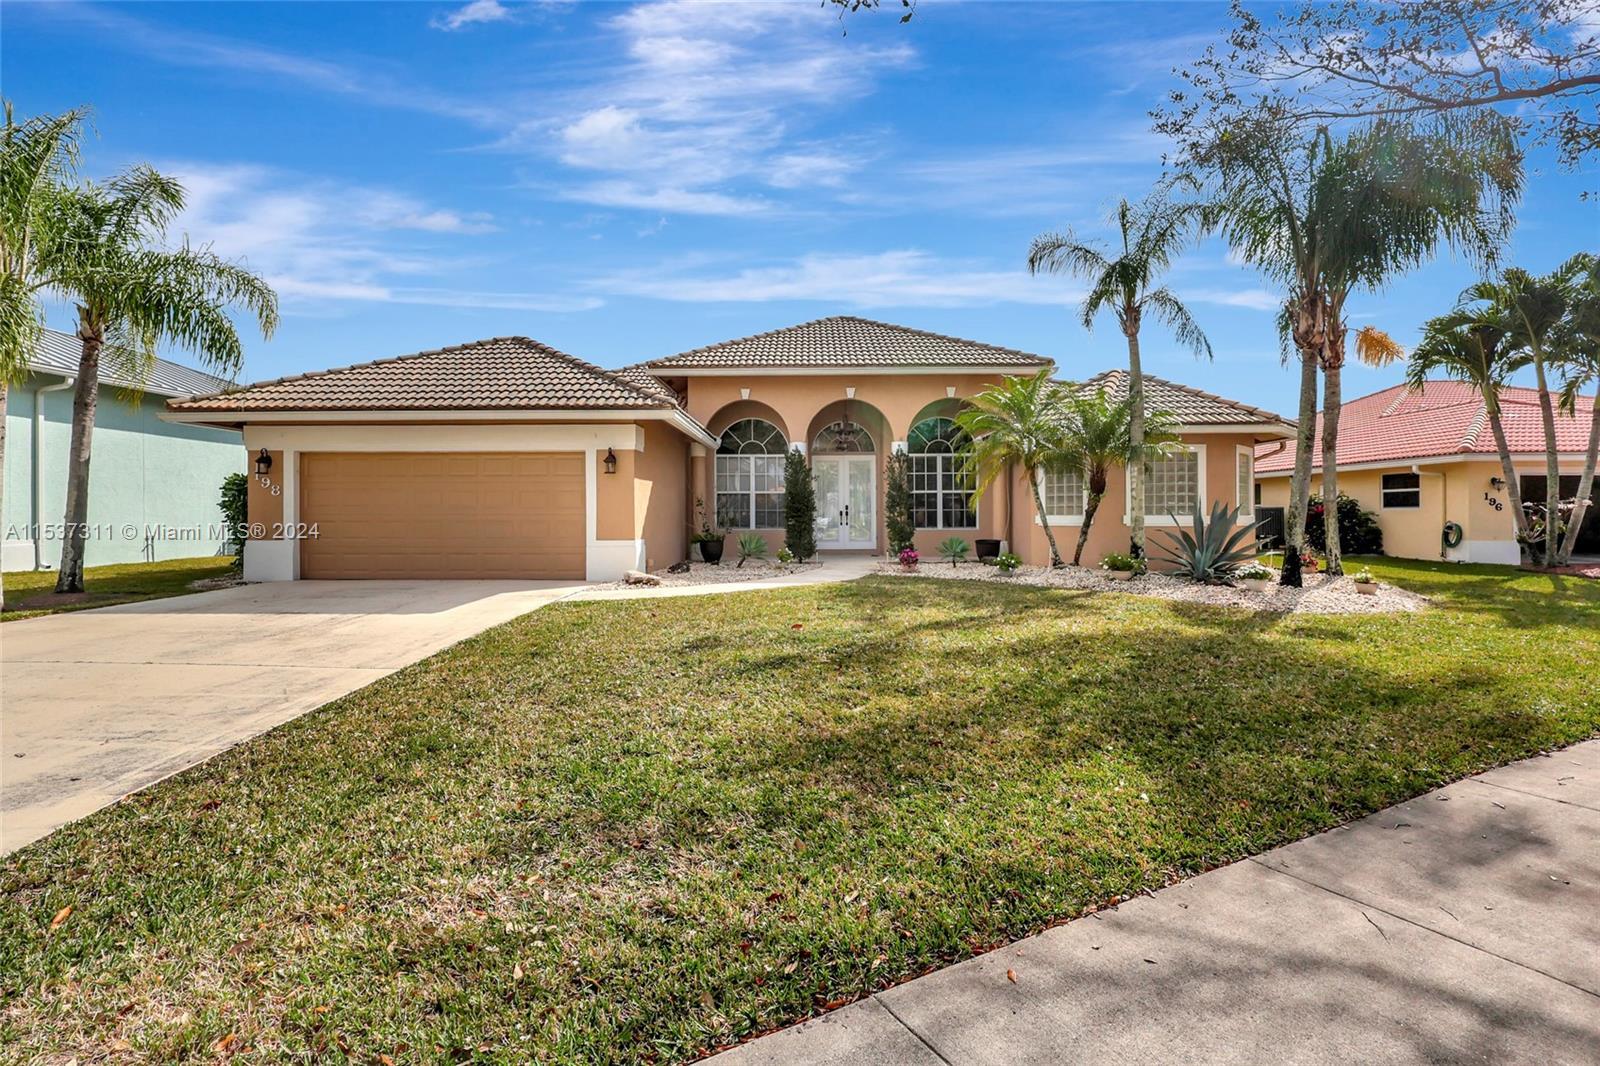 Welcome to the Estates of Royal Palm Beach!  This beautiful 4/3 pool home has an additional room per